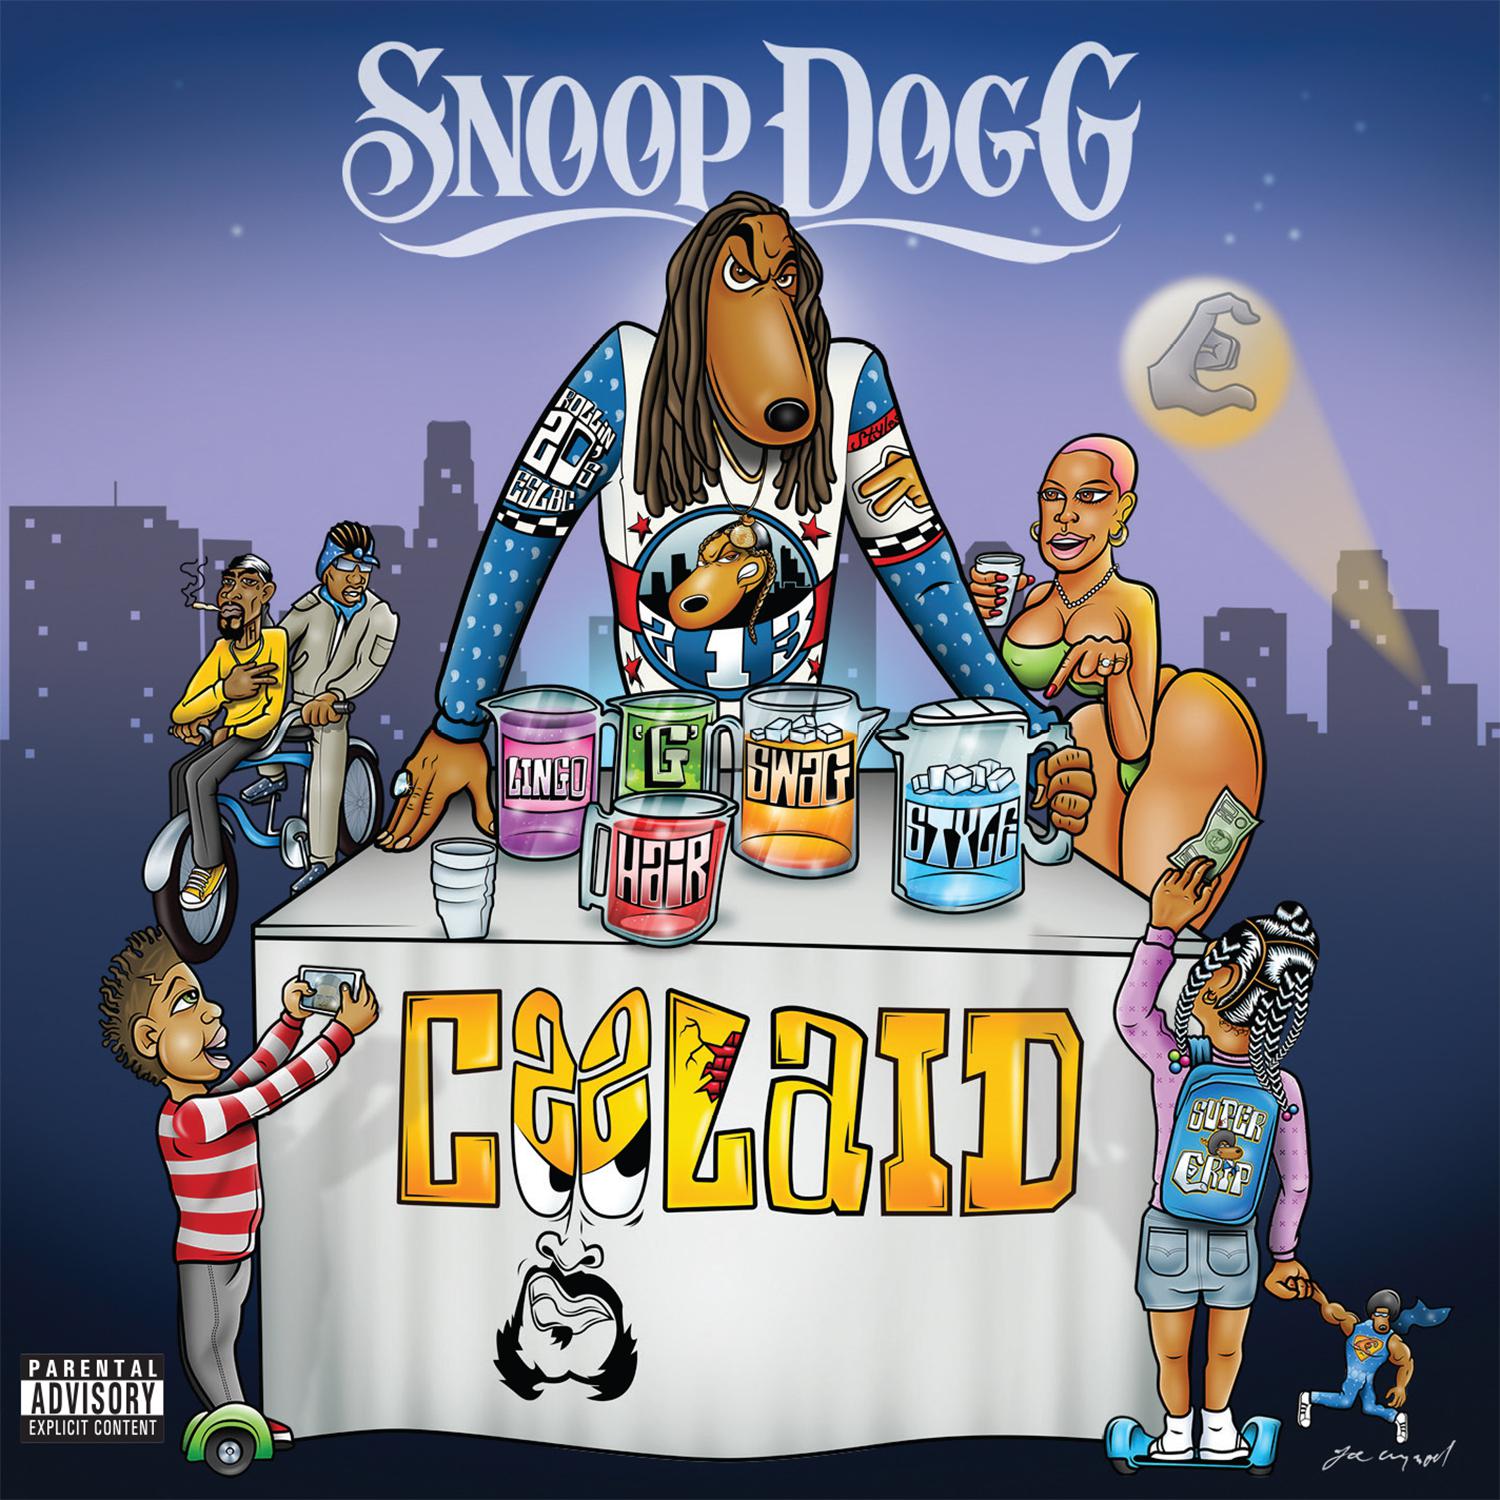 Snoop Dogg - Don't Stop (feat. Too Short)